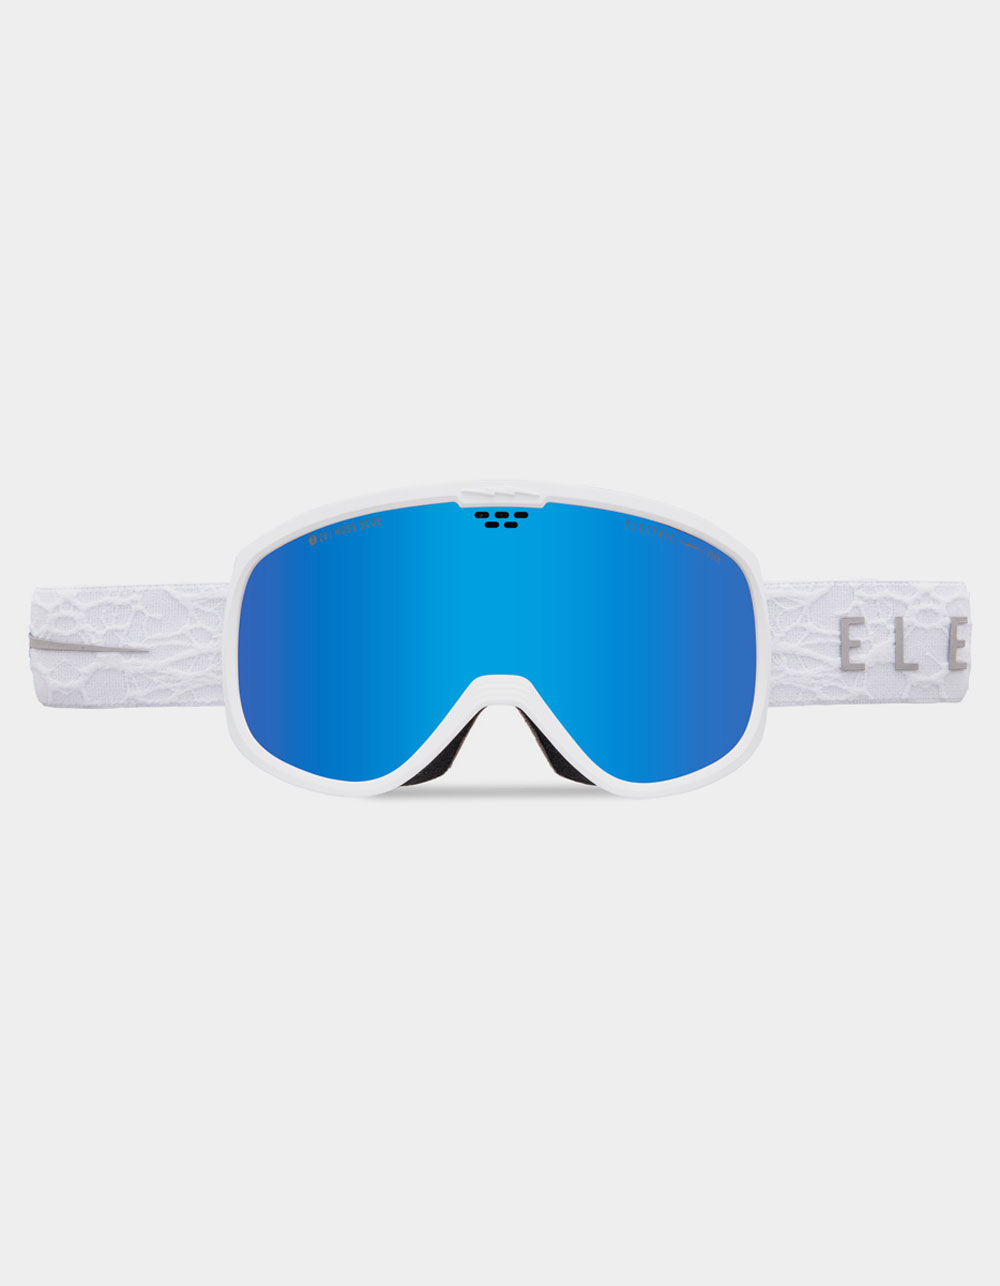 ELECTRIC Pike Snow Goggles